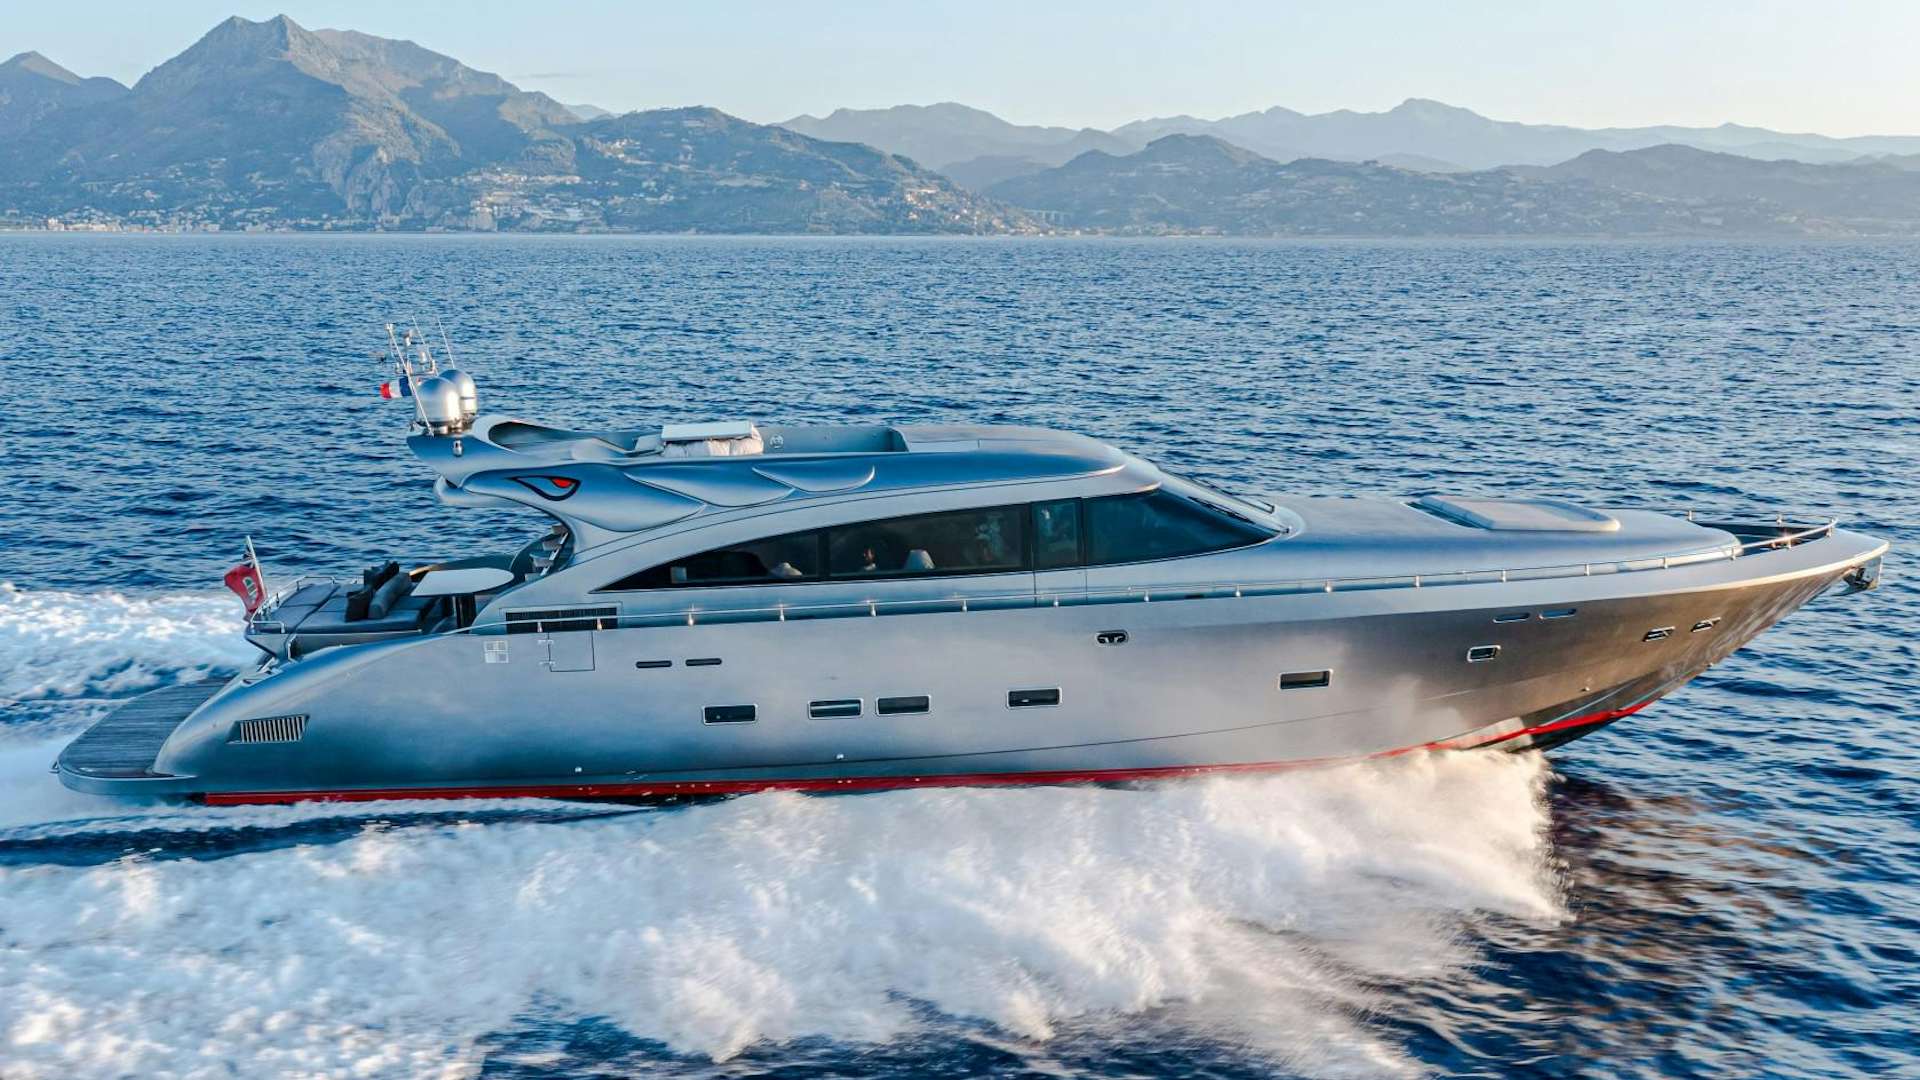 Watch Video for REVEIL Yacht for Sale